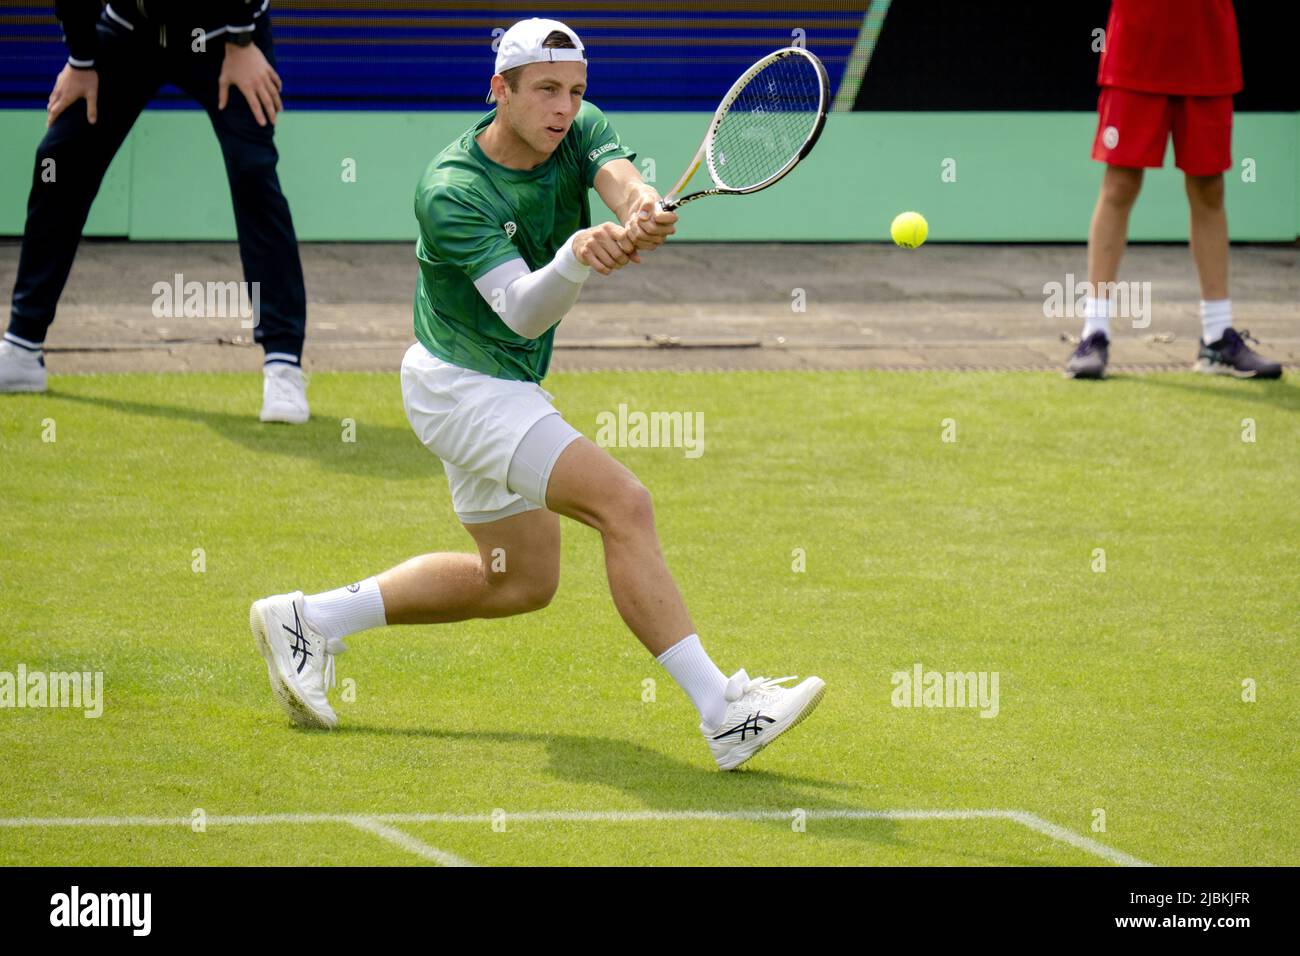 ROSMALEN - Tennis player Tallon Groet at the international tennis tournament Libema Open. The combined Dutch tennis tournament for men and women will be held on the grass courts of Autotron for twelve days. ANP SANDER KING Stock Photo